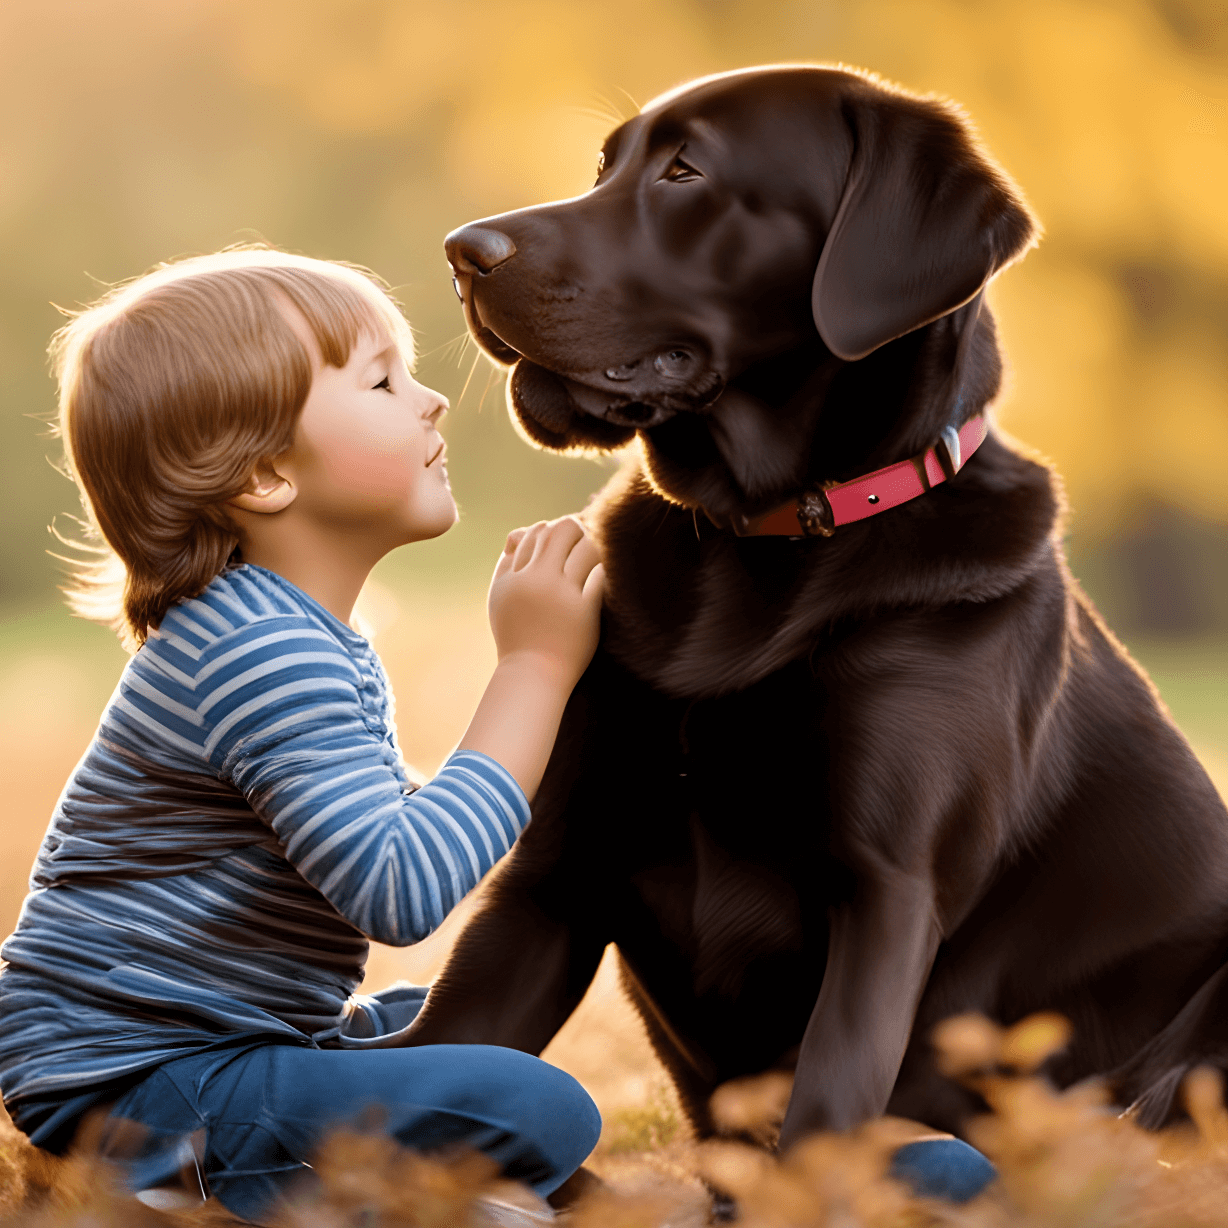 An English Chocolate Lab sharing a tender moment with a young child embodying its nurturing spirit